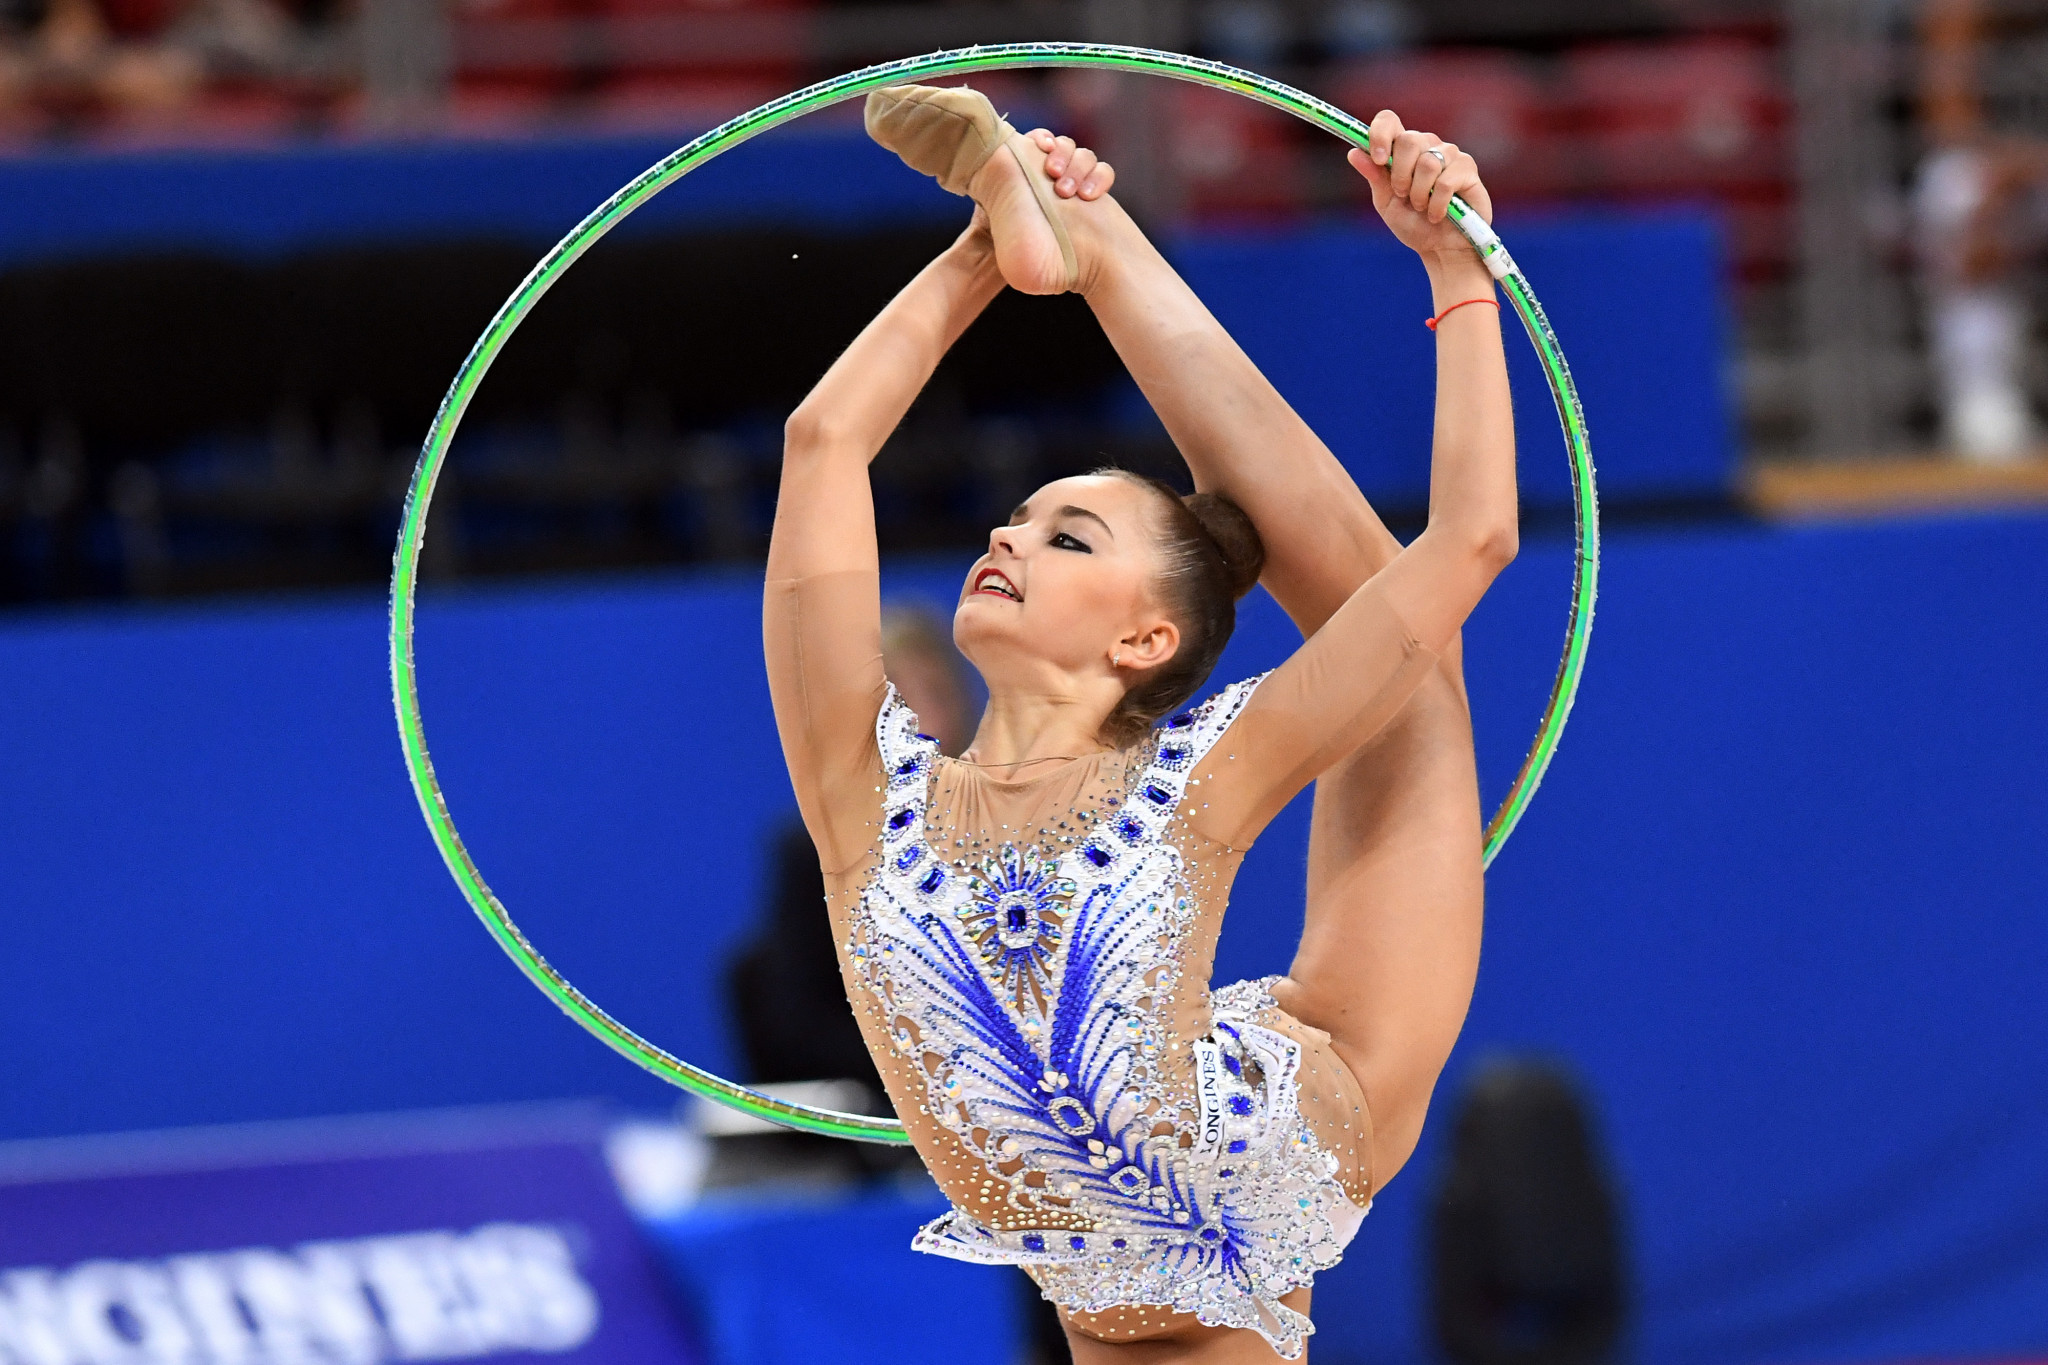 Arina Averina will defend her all-around title at the Rhythmic Gymnastics European Championships in Baku ©Getty Images